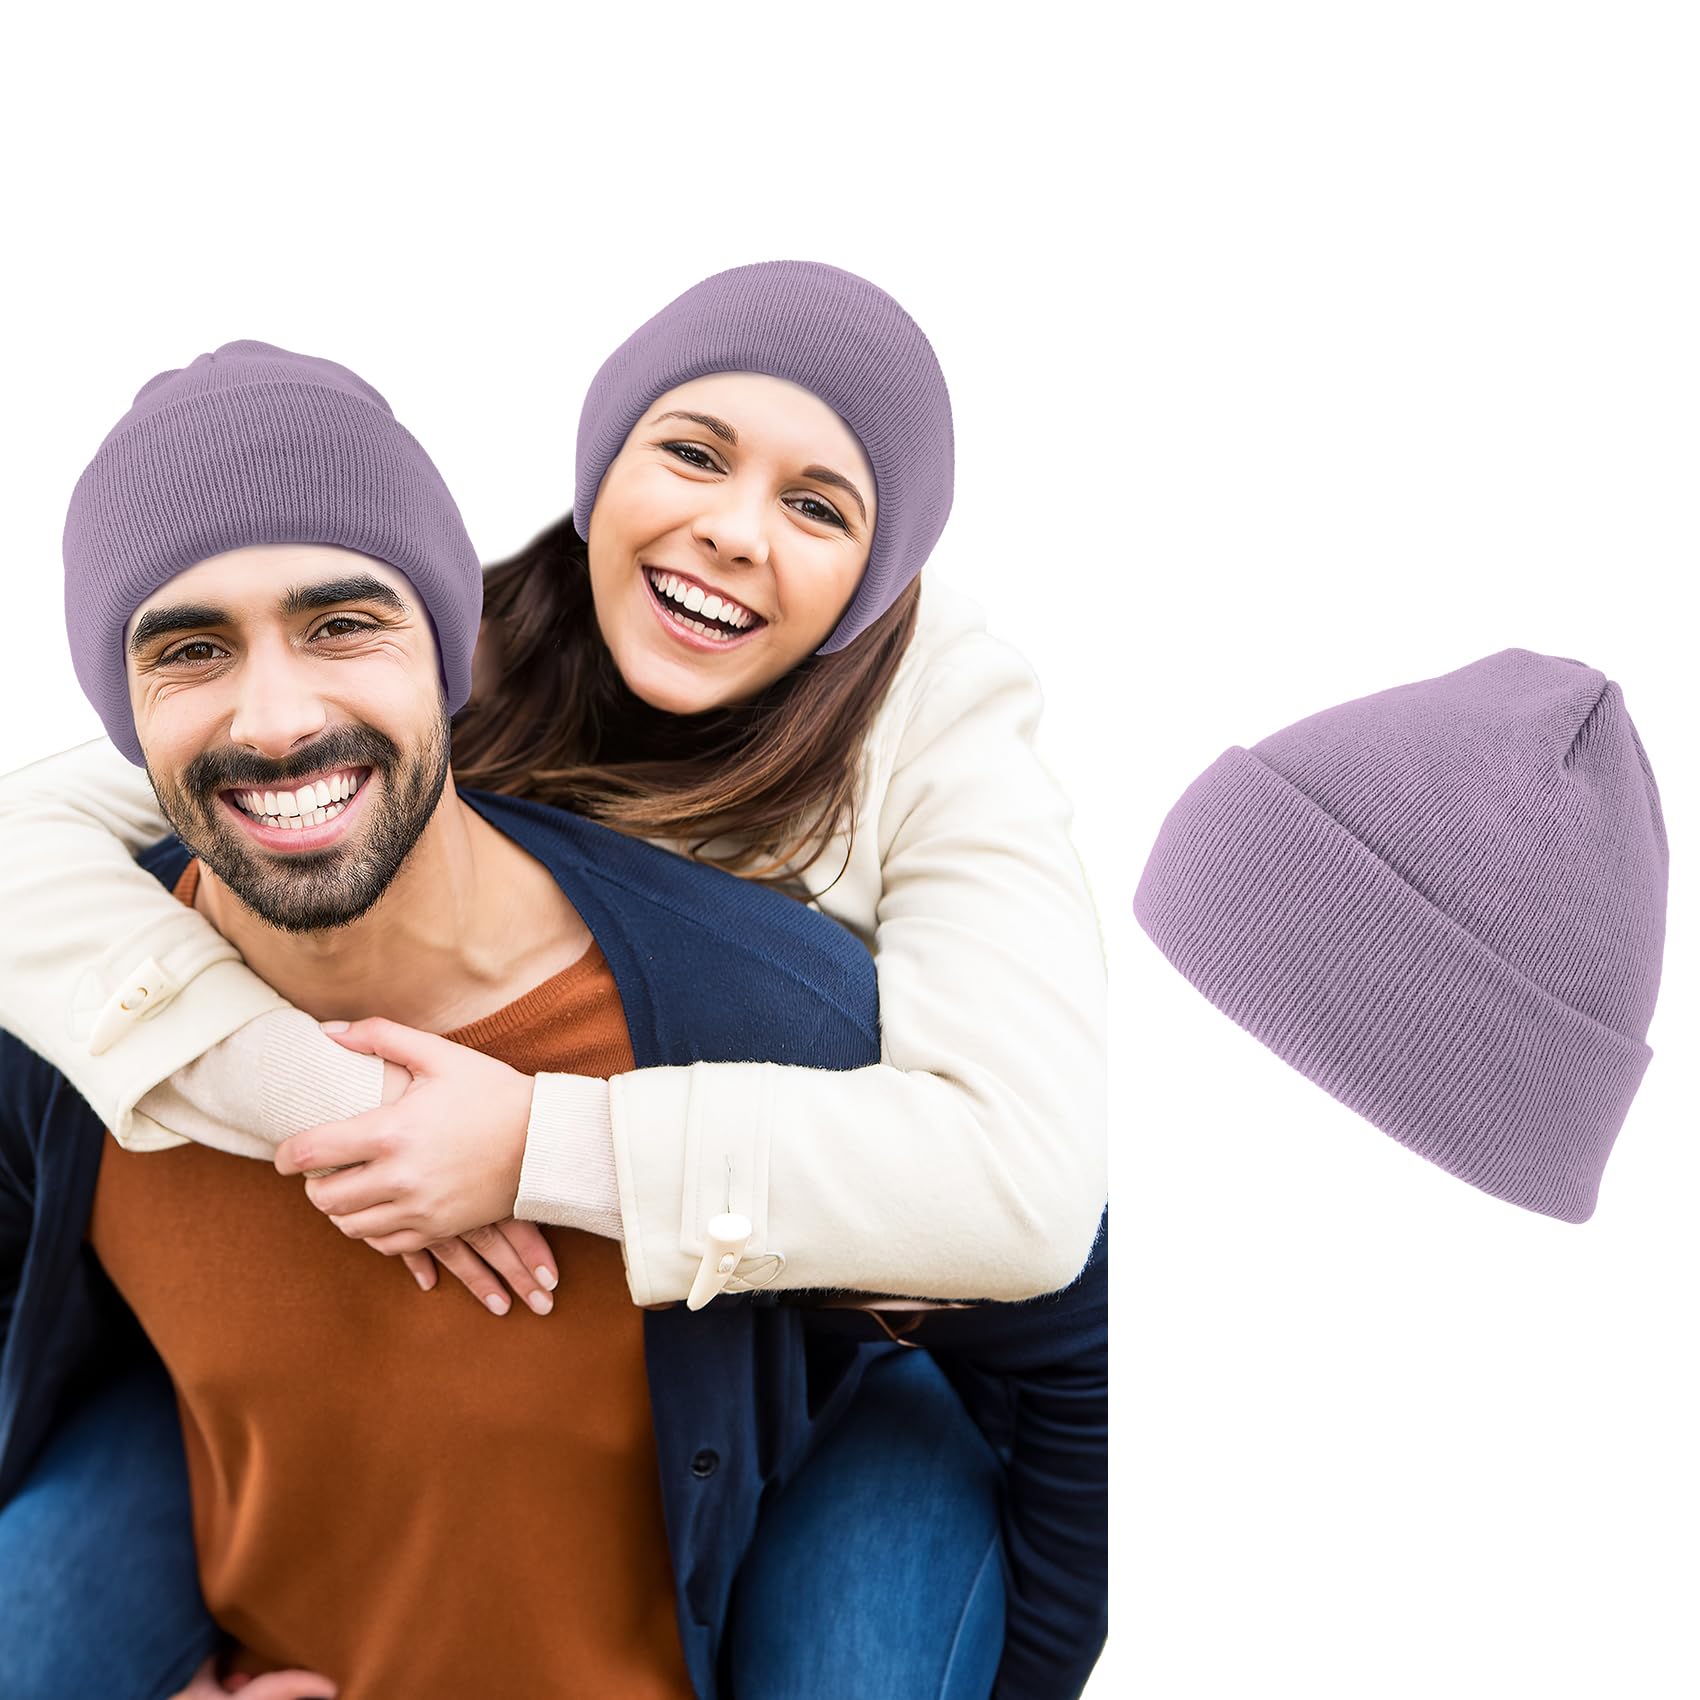 Purple Beanie,Cool Beanies,Stocking Hats for Women,Winter Cap for Women,Hiking Gear and Accessories,Under Armour Beanie,Mens Knit Hat,Sailing Gifts,Cool Hiking Gifts,Knit Caps for Men,Silk Beanie